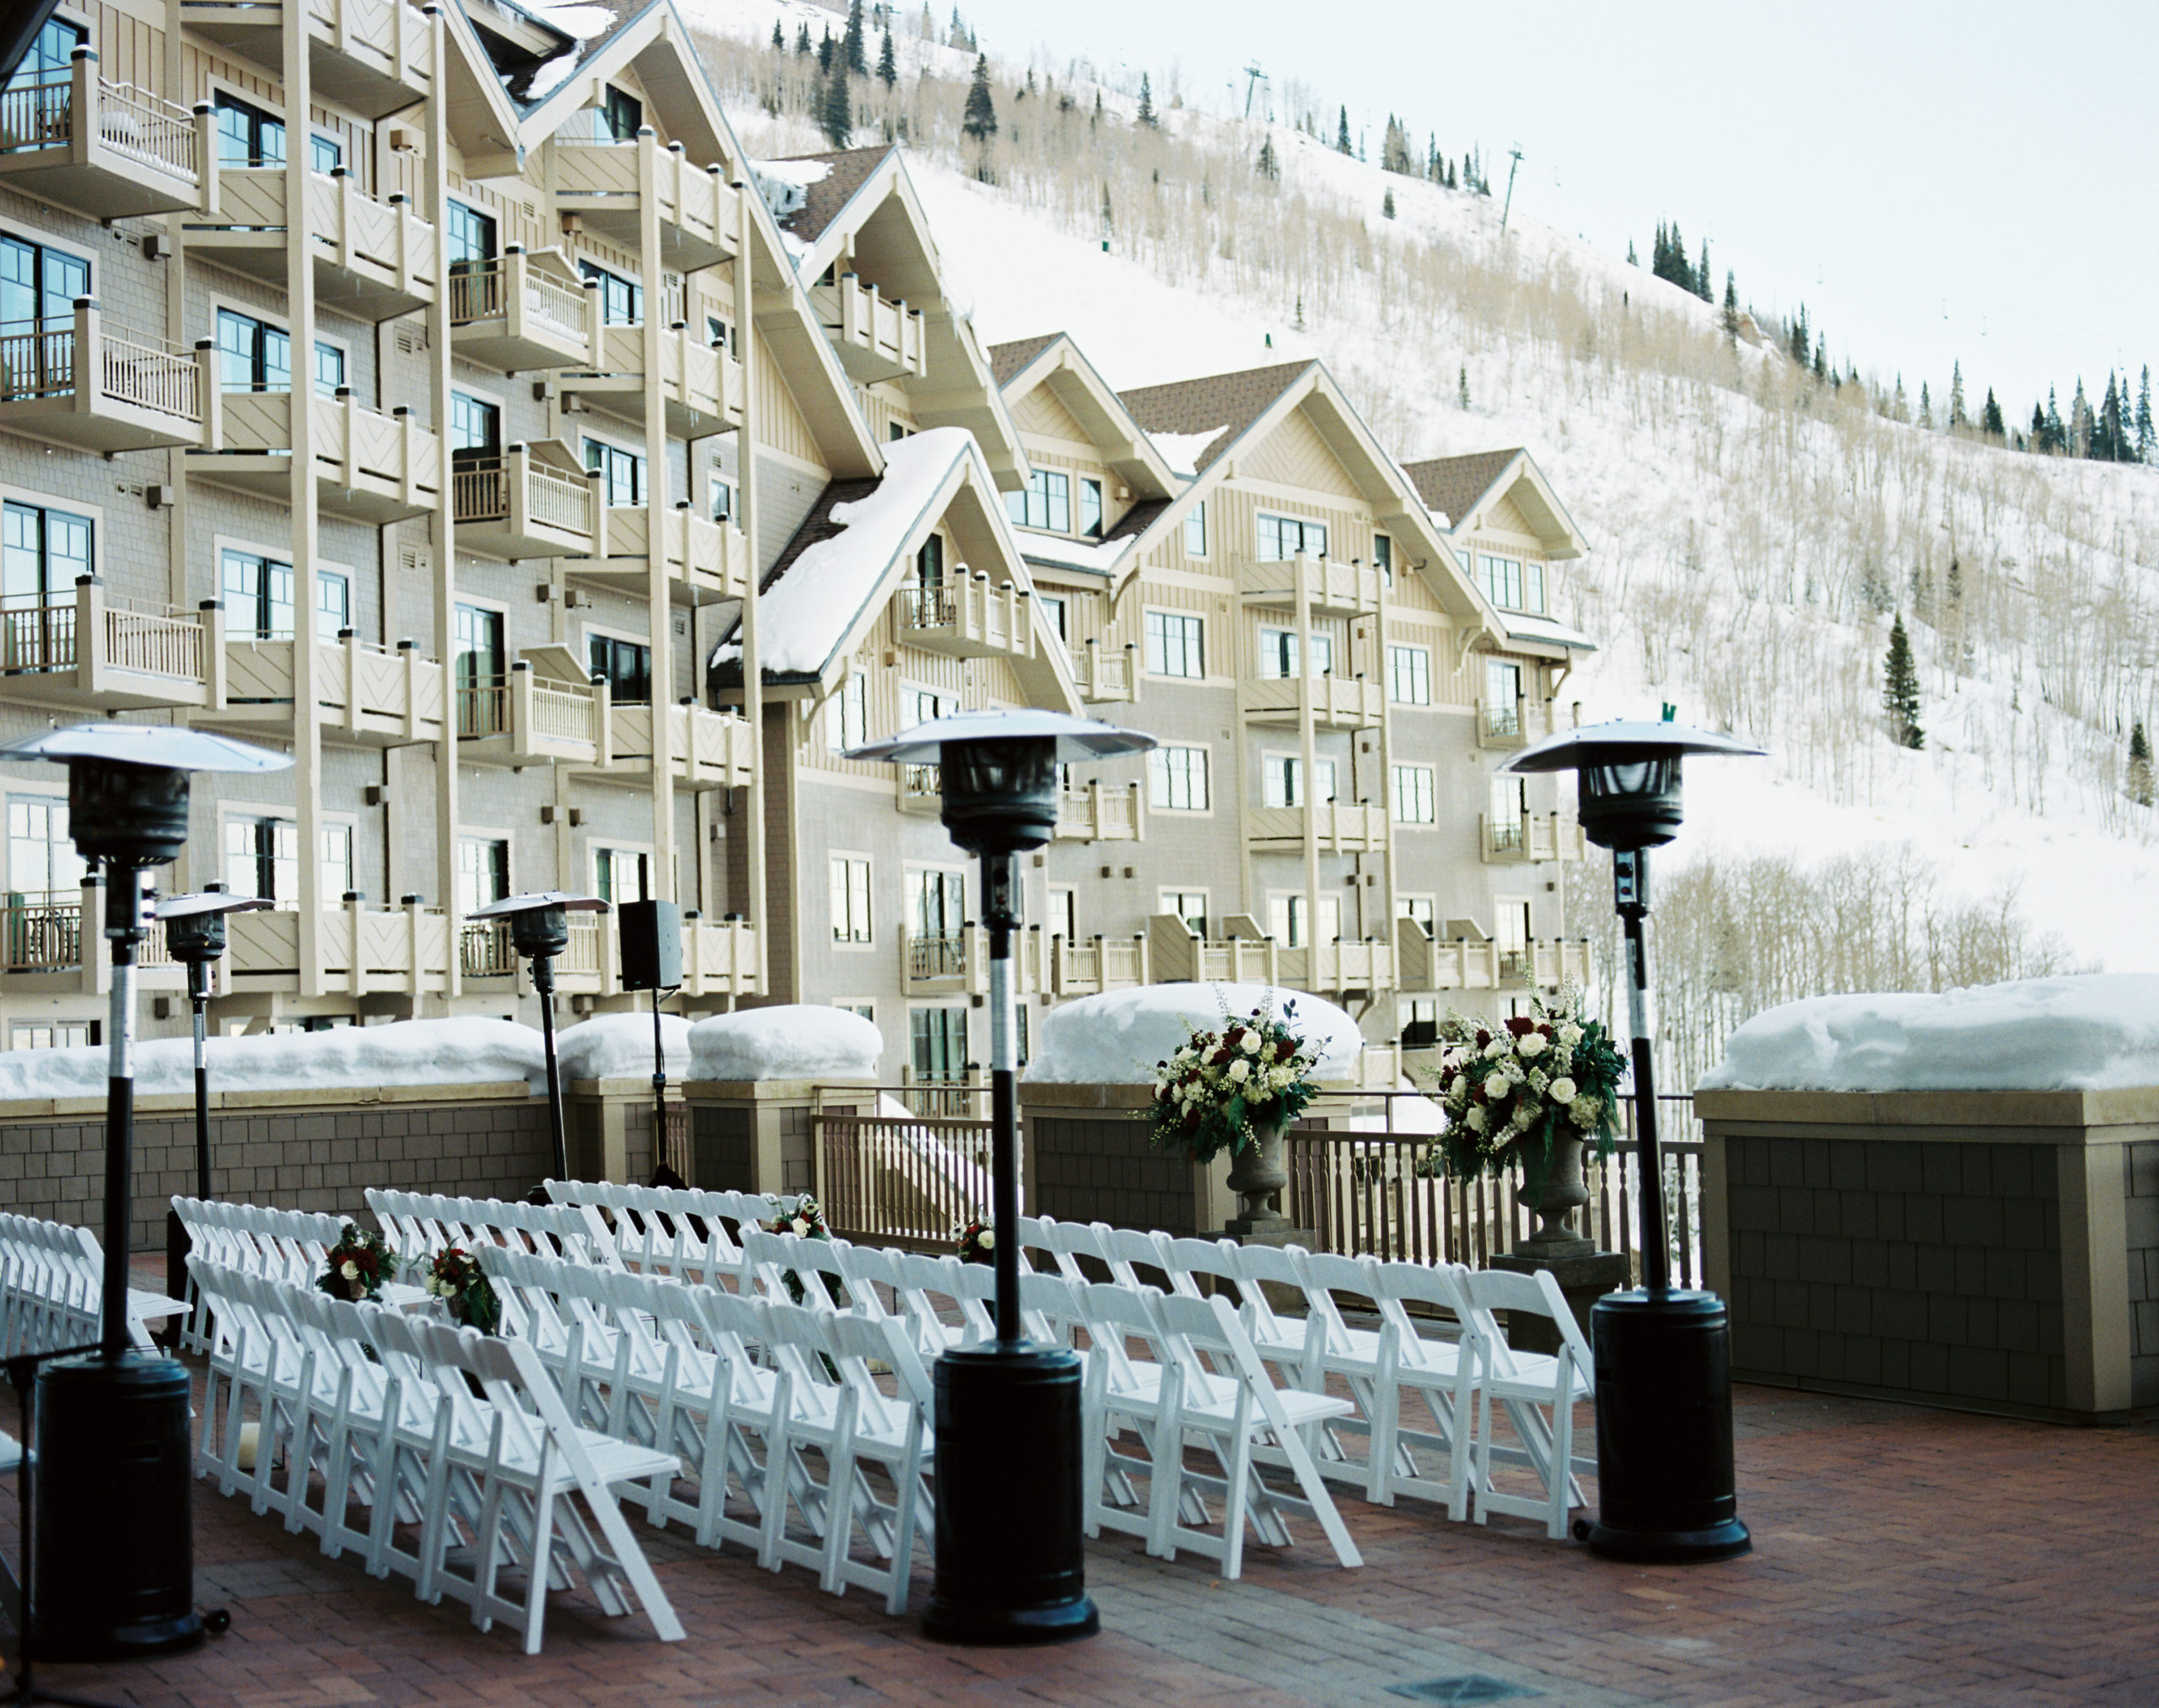 This Park City winter wedding held an outside ceremony was at Montage Deer Valley. The seating overlooked white snowy mountains. At the end of each aisle they had heaters to make sure guests were comfortable and warm.